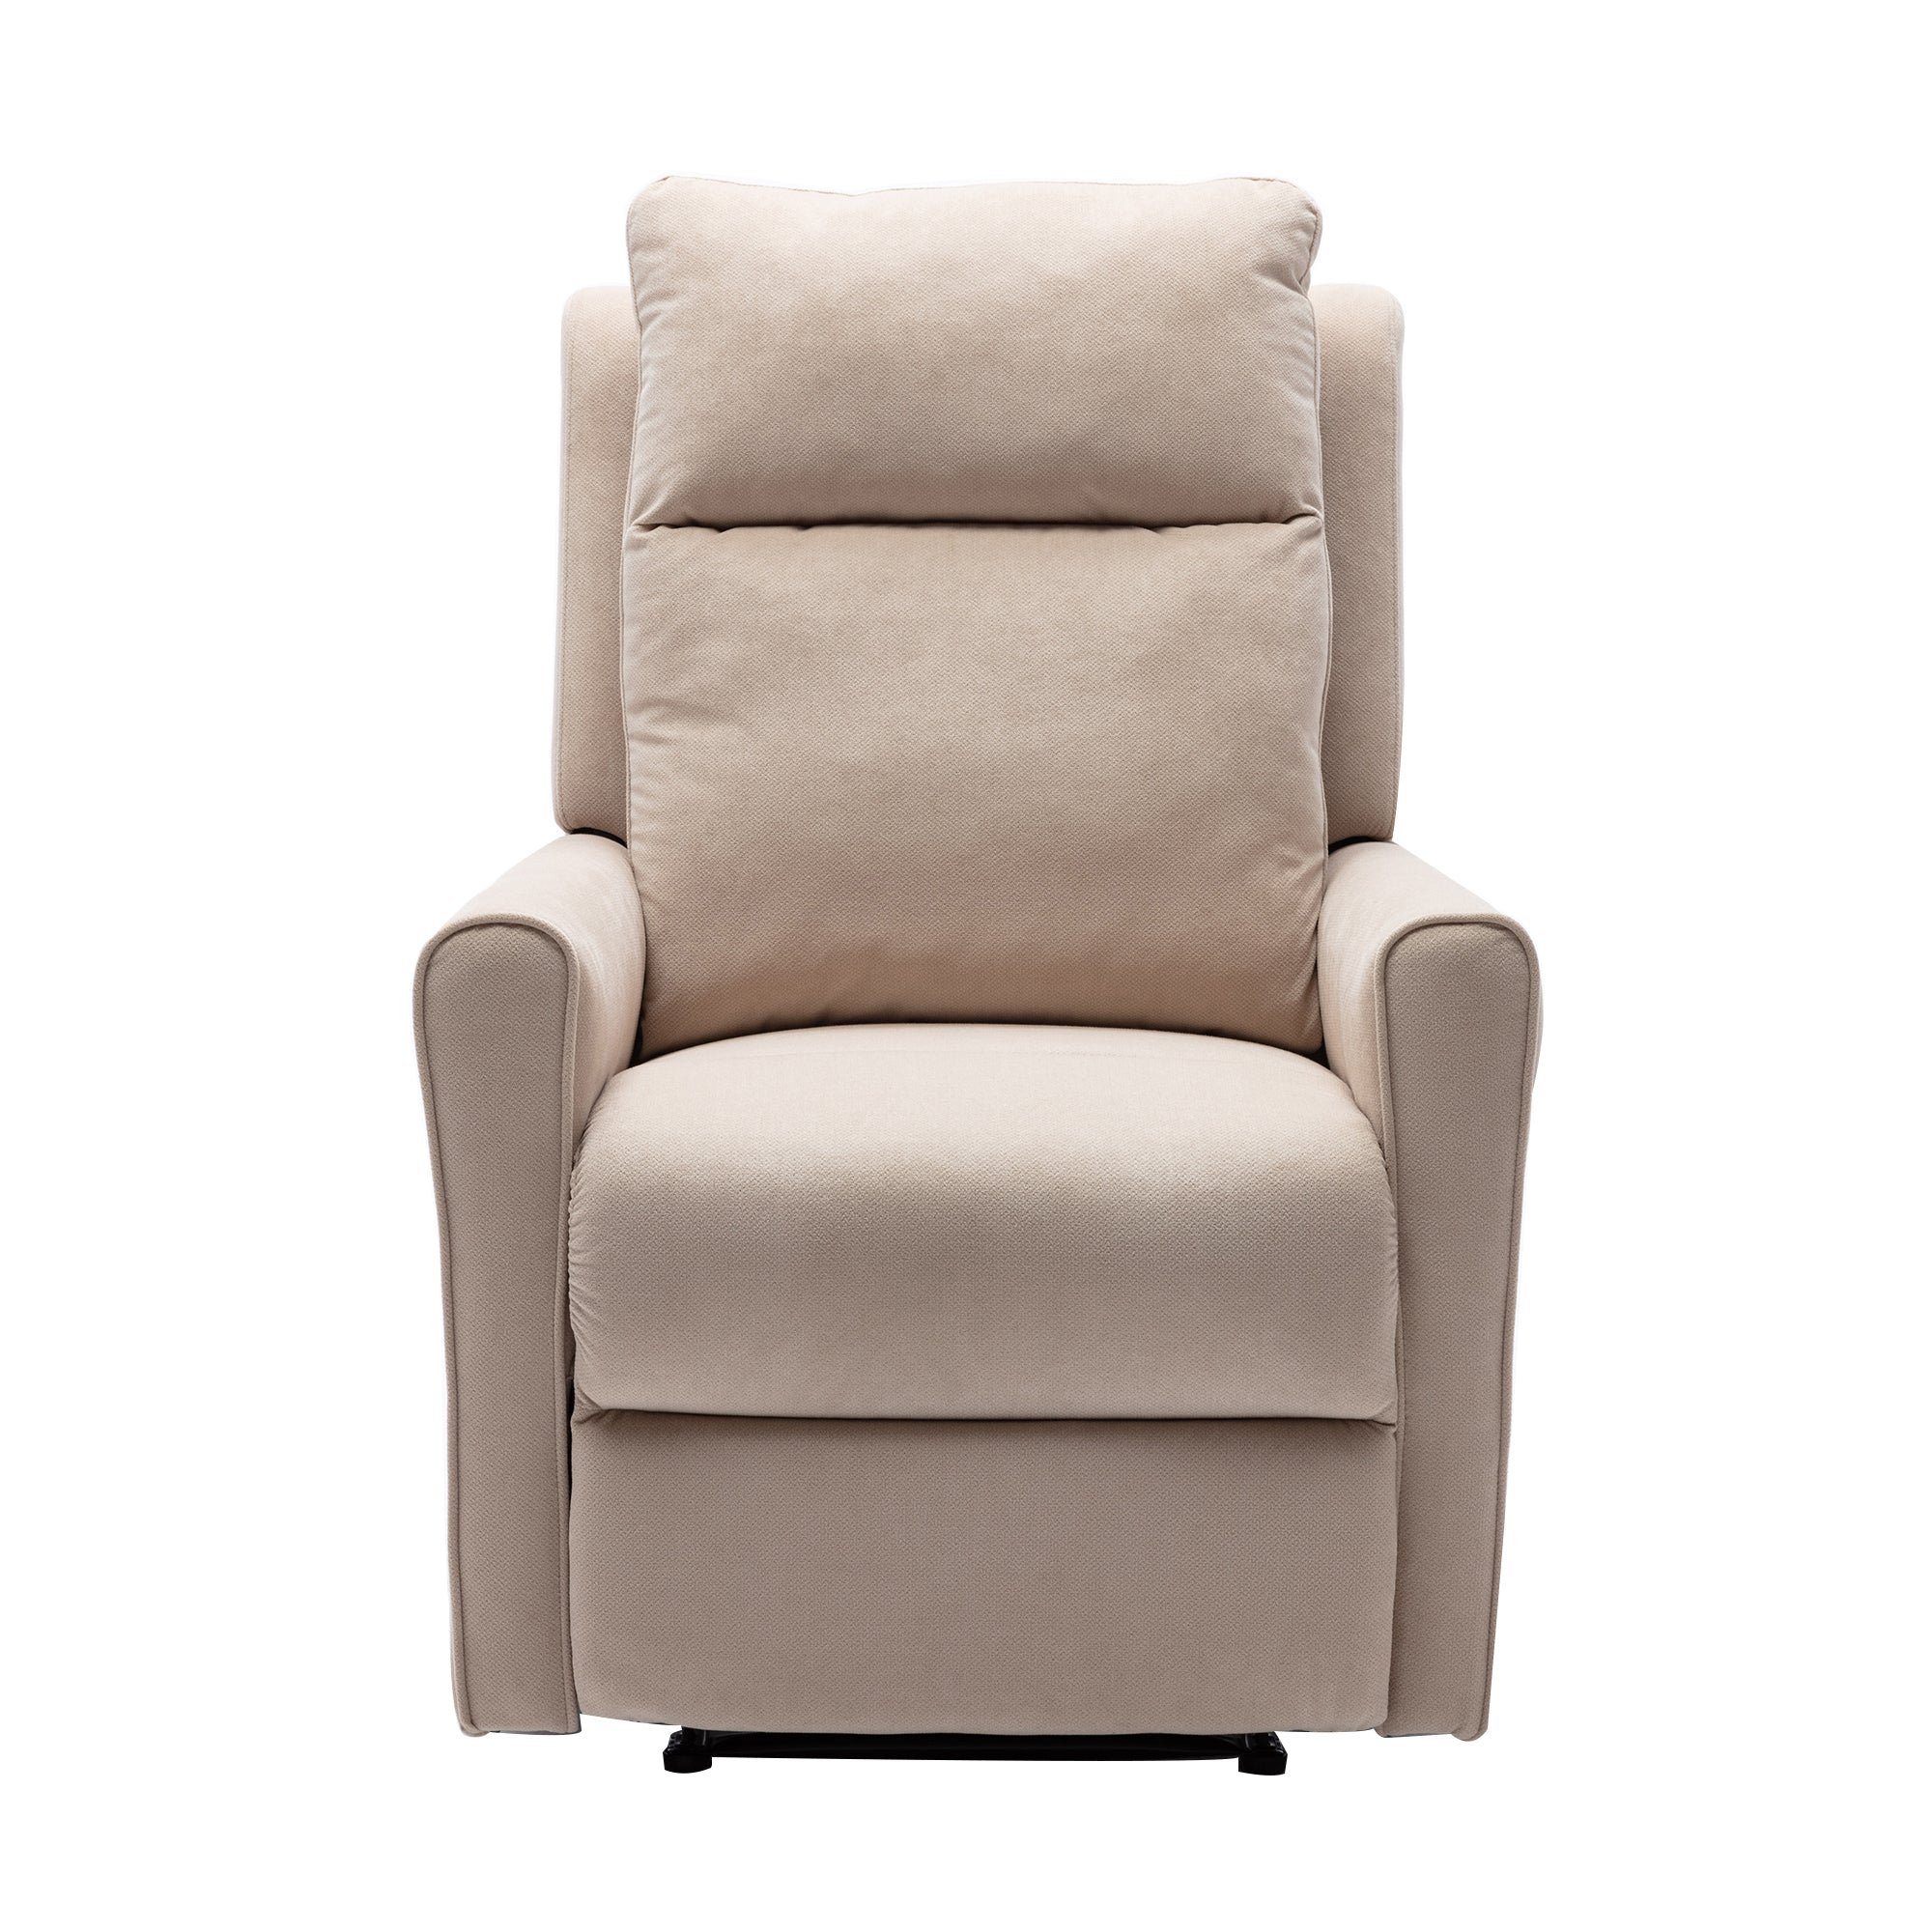 Massage Recliner with 12 Massage Nodes Function-Easy Lounge, Reclining Lounge Chair with Removable Padded Backrest-Boyel Living